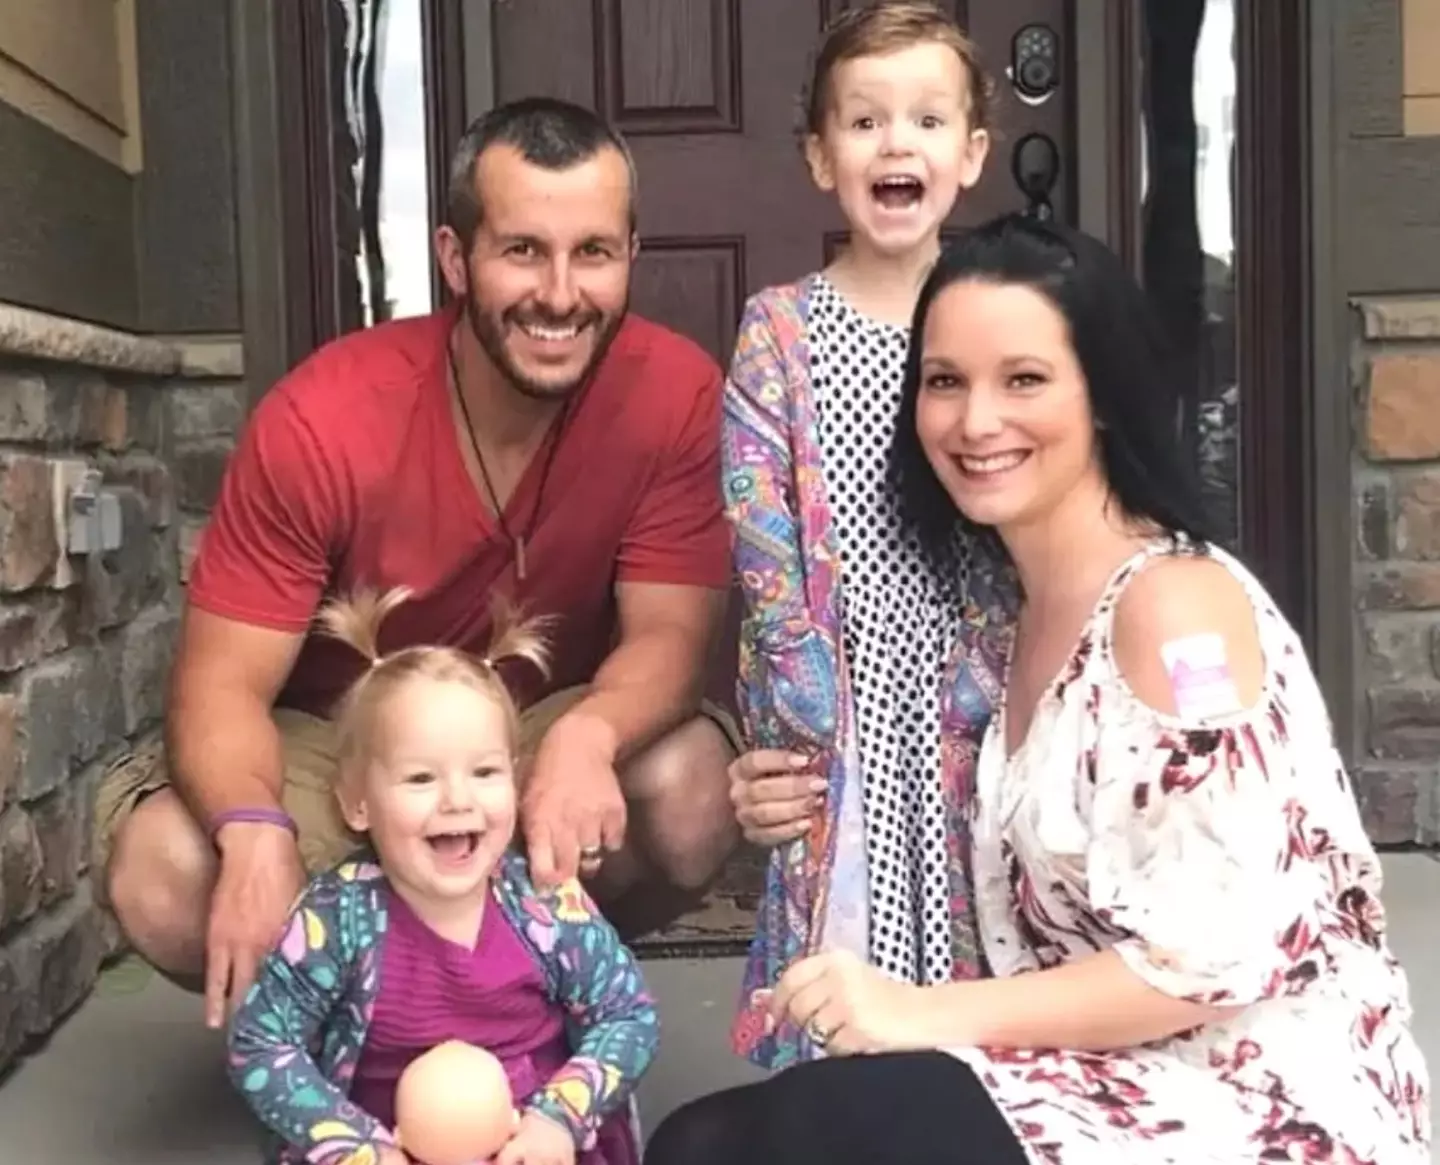 Chris Watts murdered his entire family.